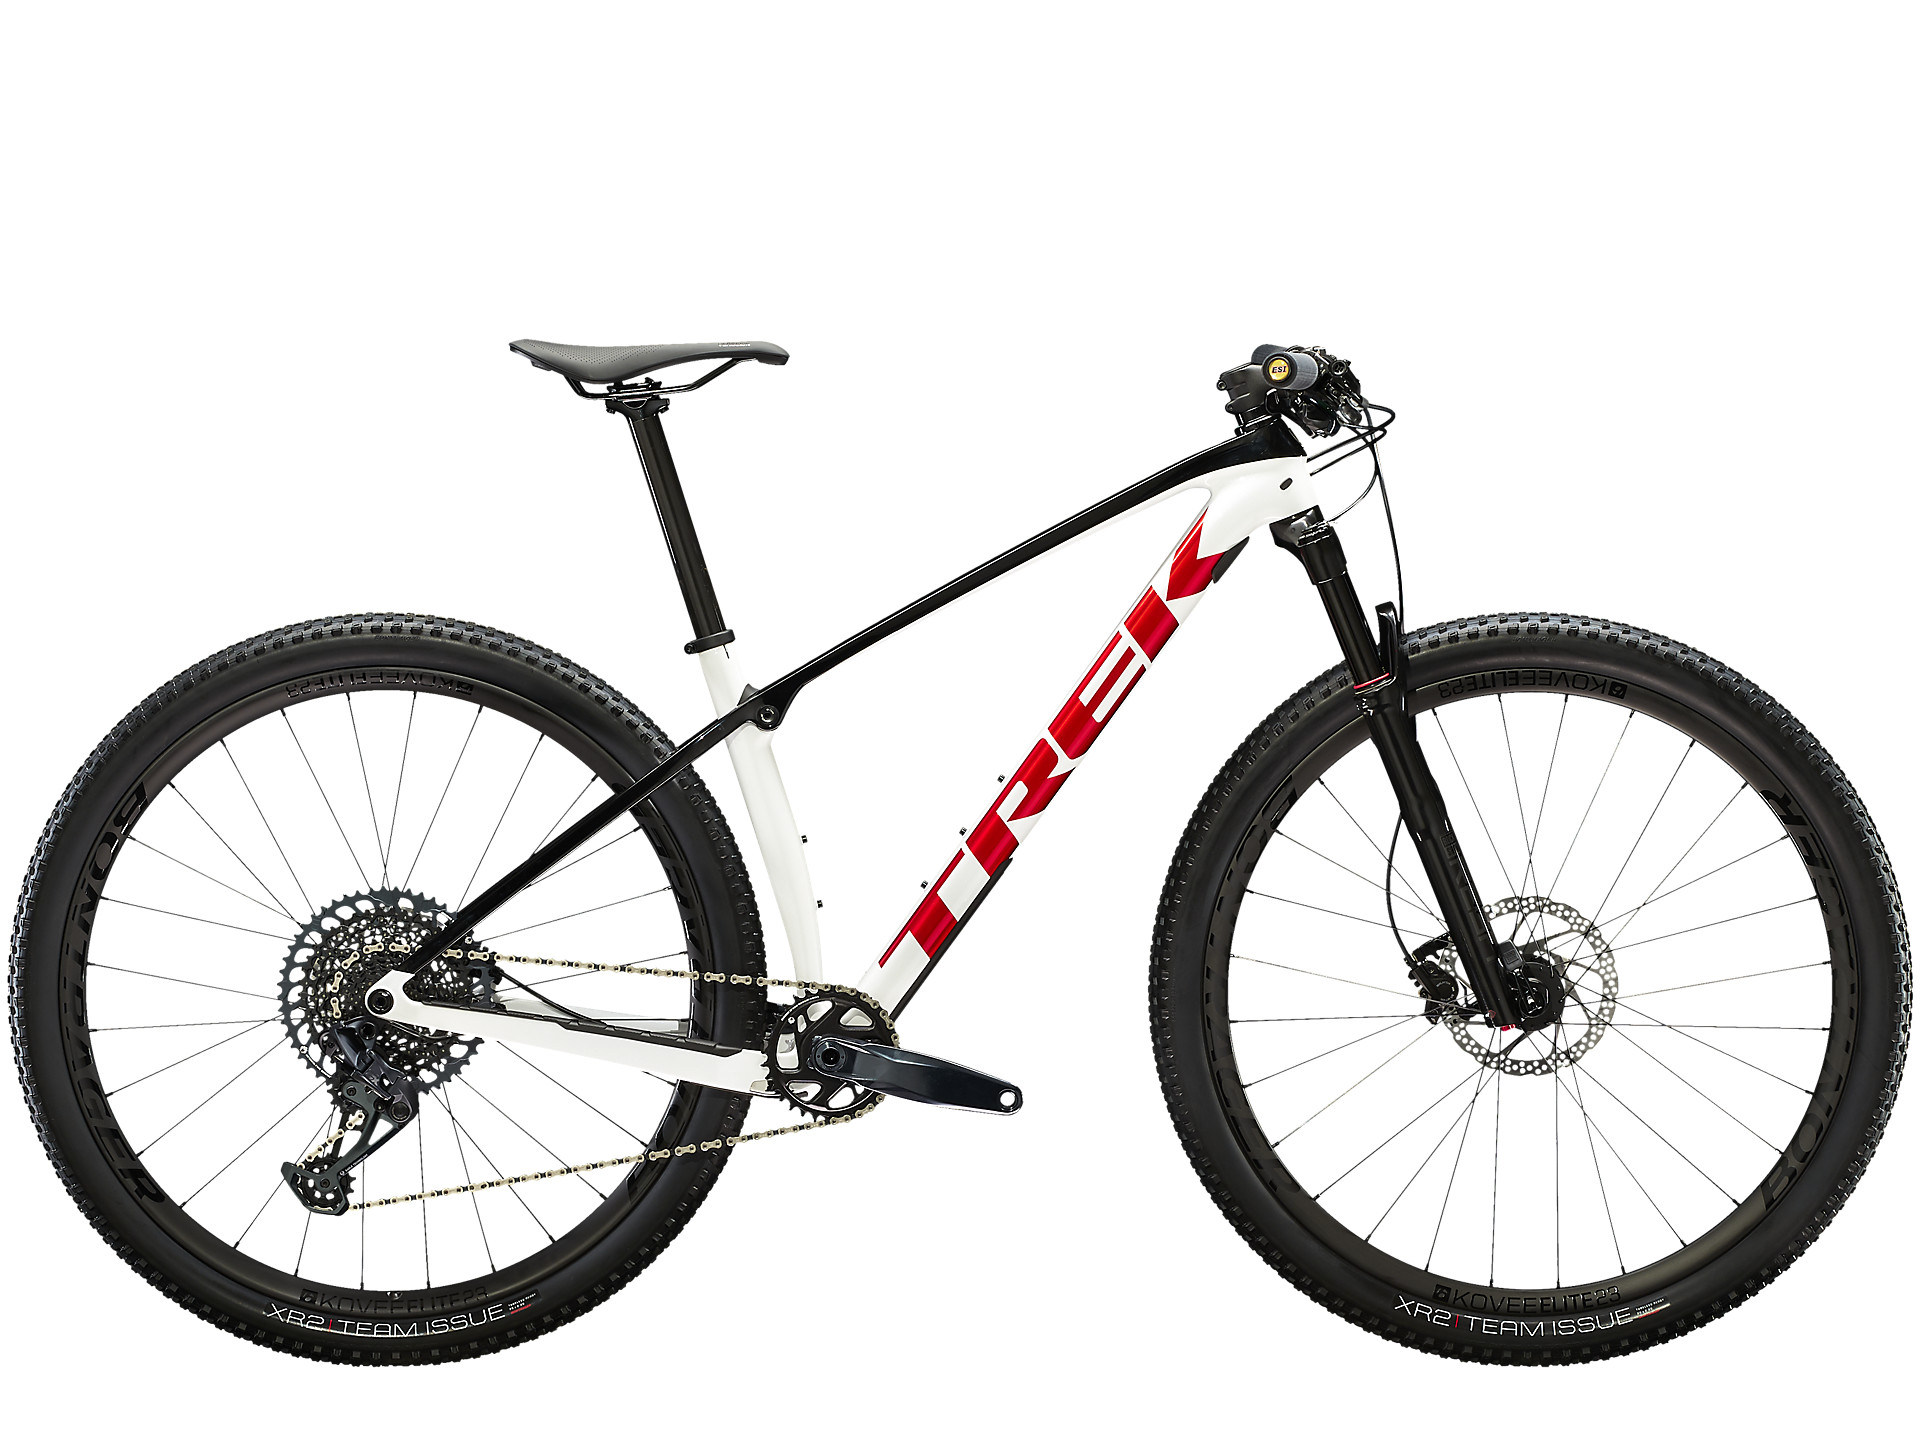 <a href="https://cycles-clement.be/product/procaliber-9-7-l-29-crystal-white-trek-black/">PROCALIBER 9.7 L 29 CRYSTAL WHITE/TREK BLACK</a>